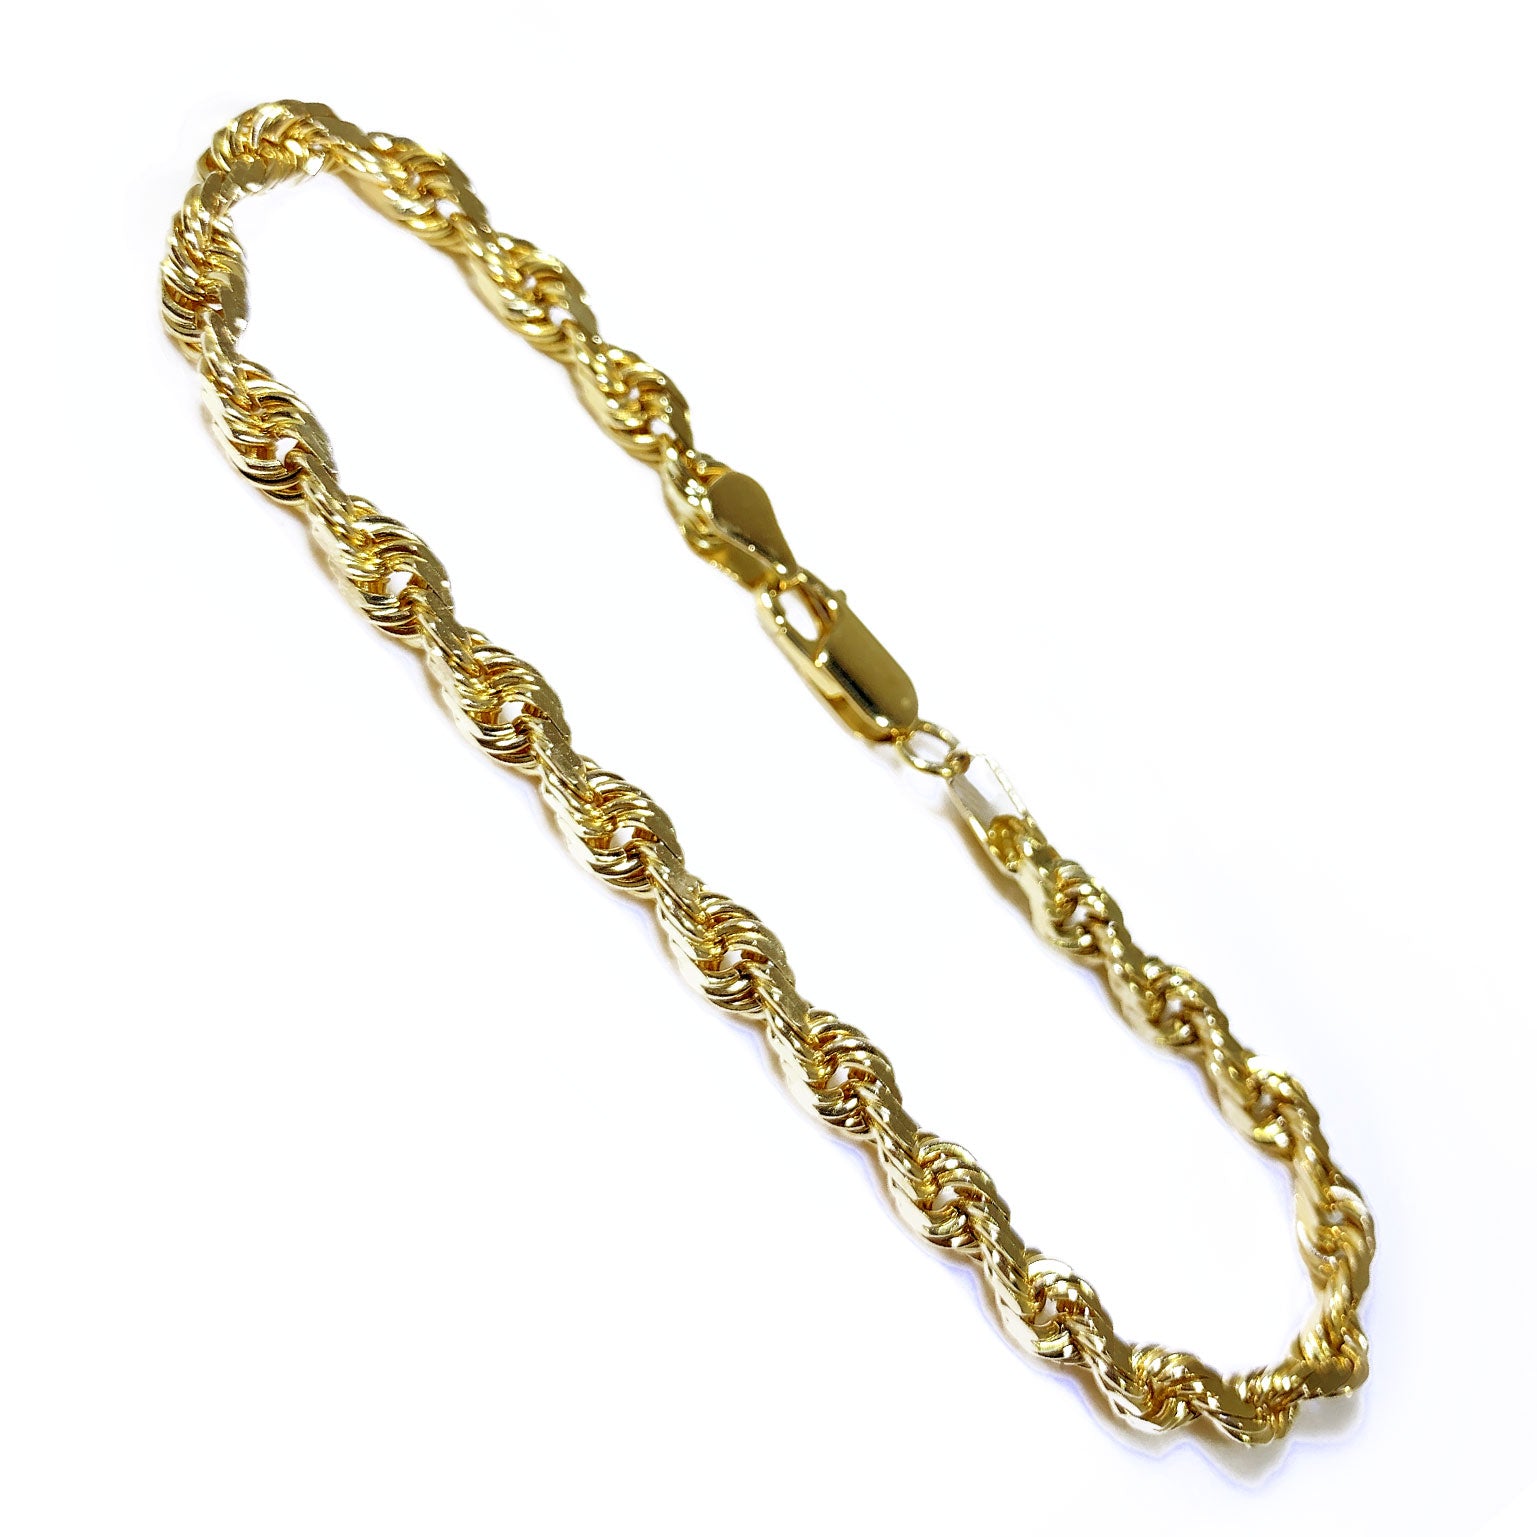 10K Yellow Gold Men’s Fancy Rope Style Bracelet 9″ Inches